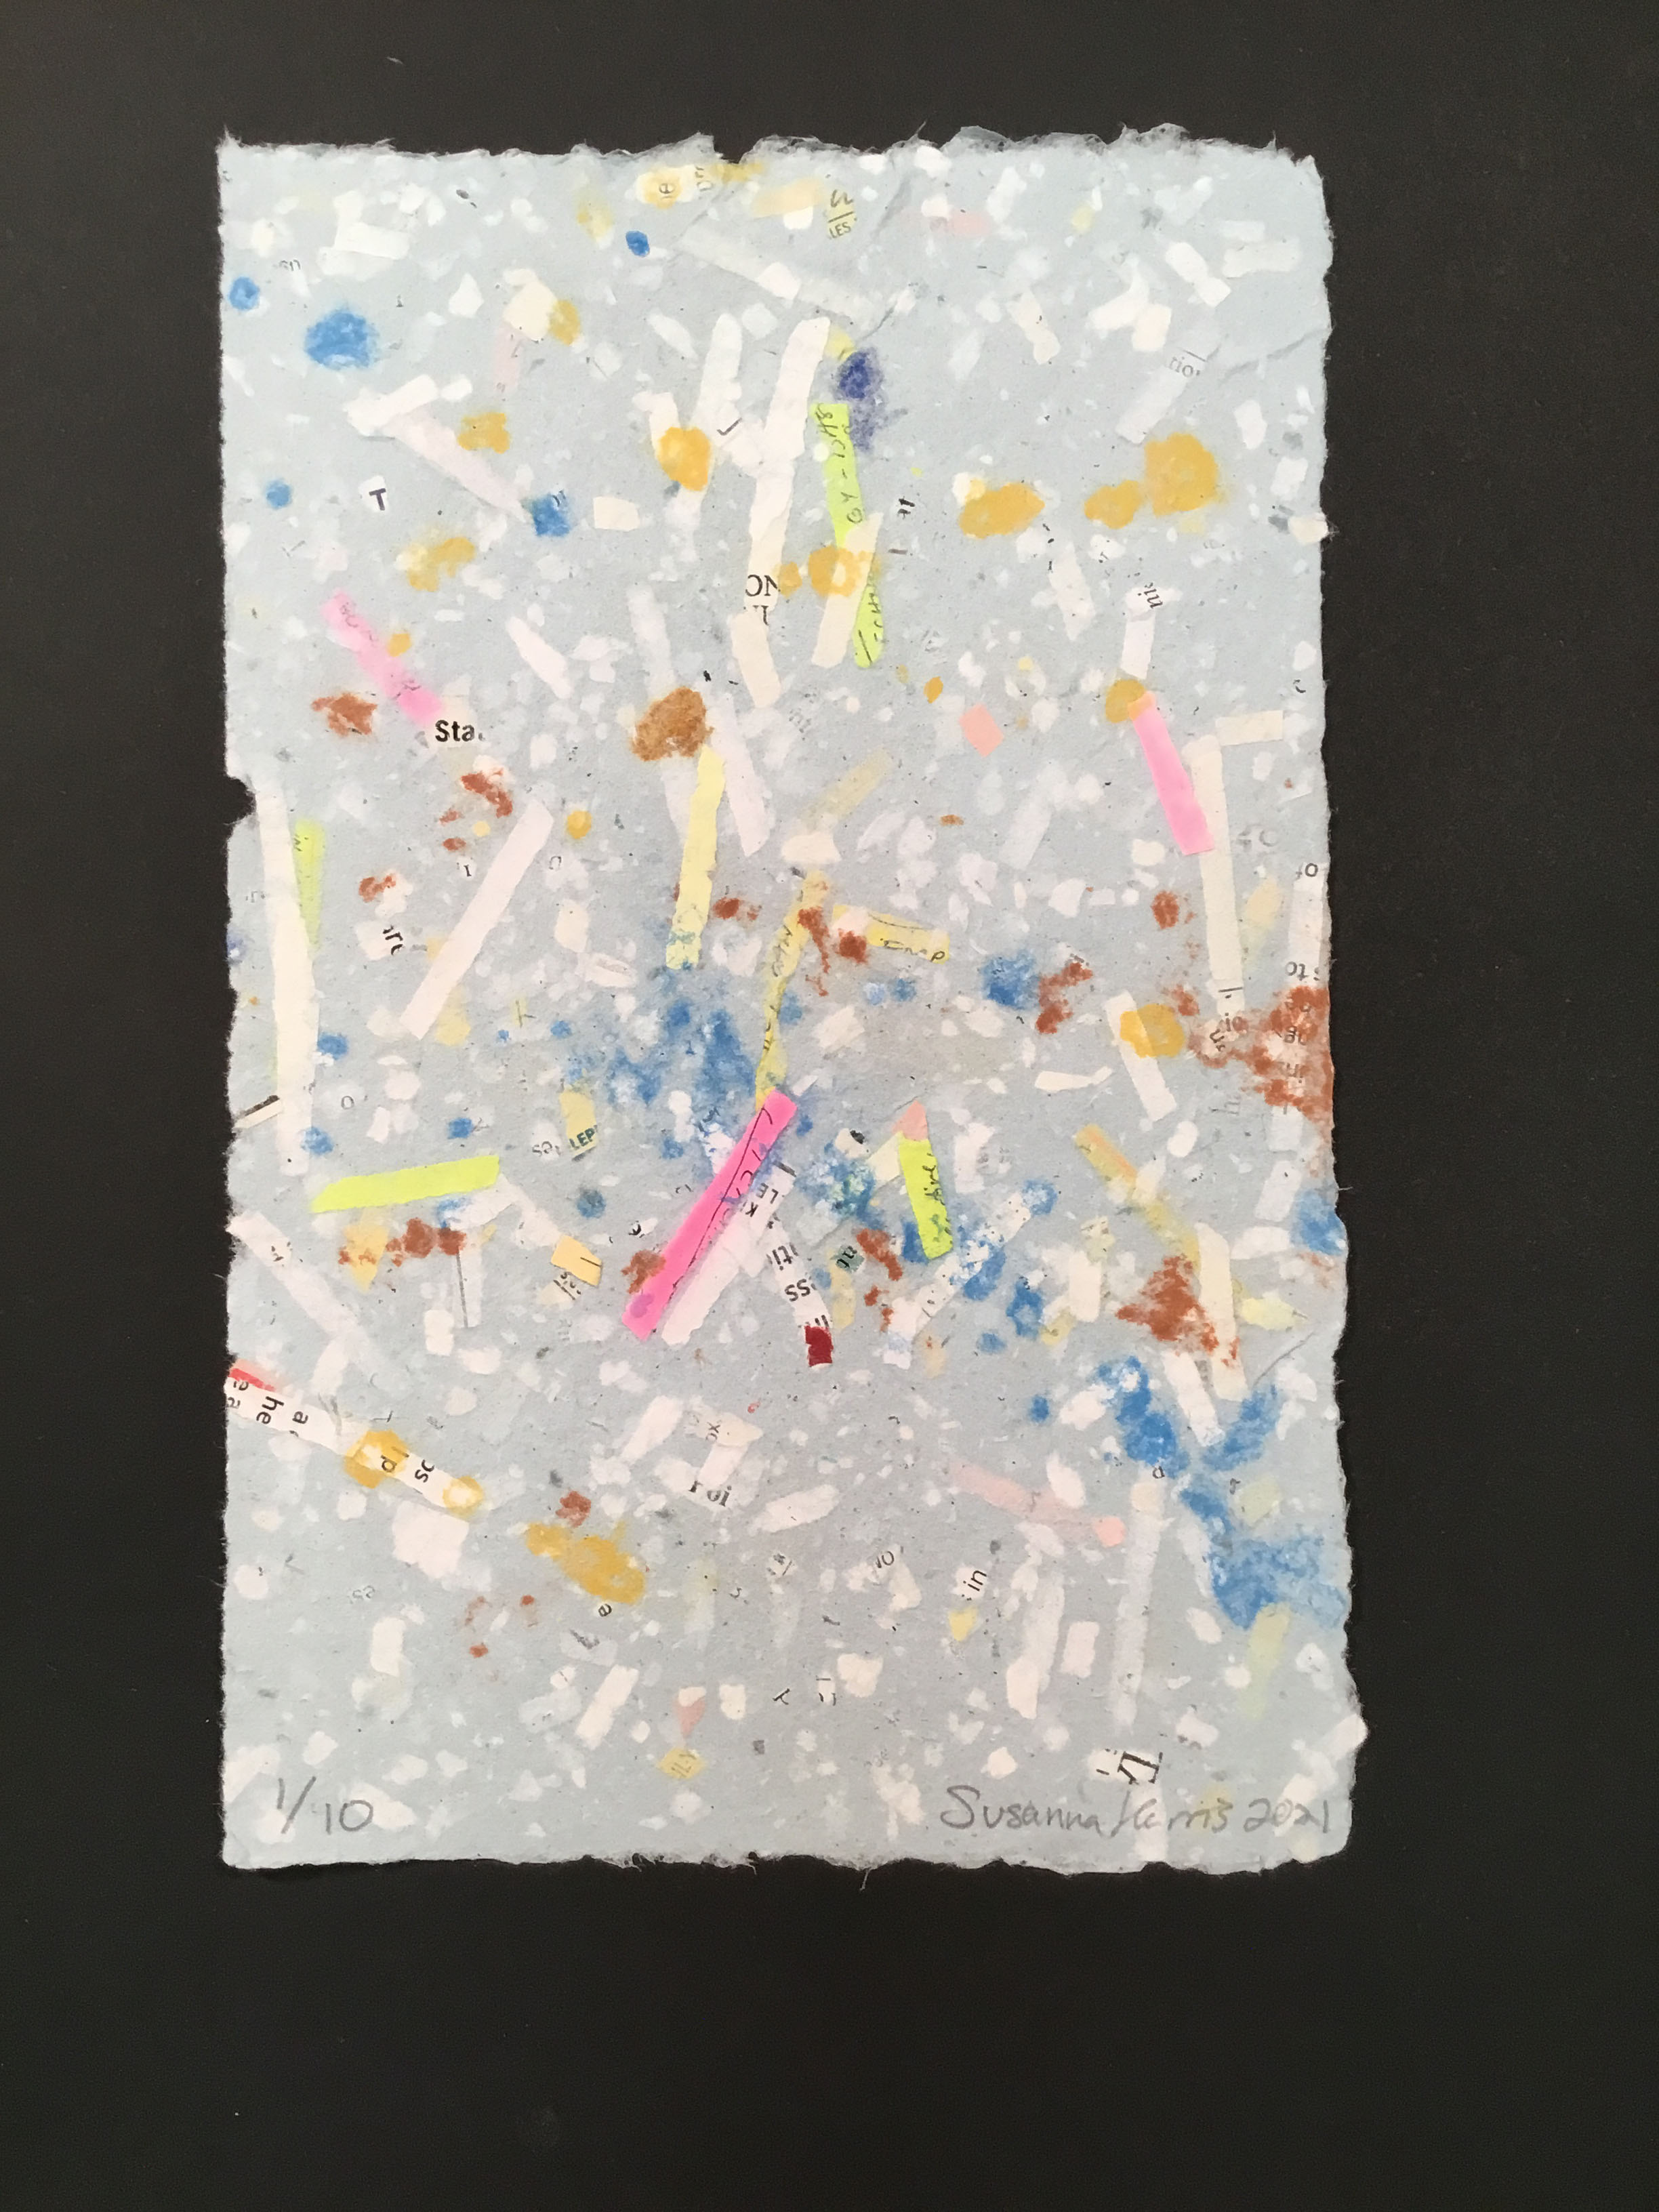  A sheet of light blue-grey handmade paper with blue, orange, and rust-colored lint, pink, green, and white office paper, and deckled edges.